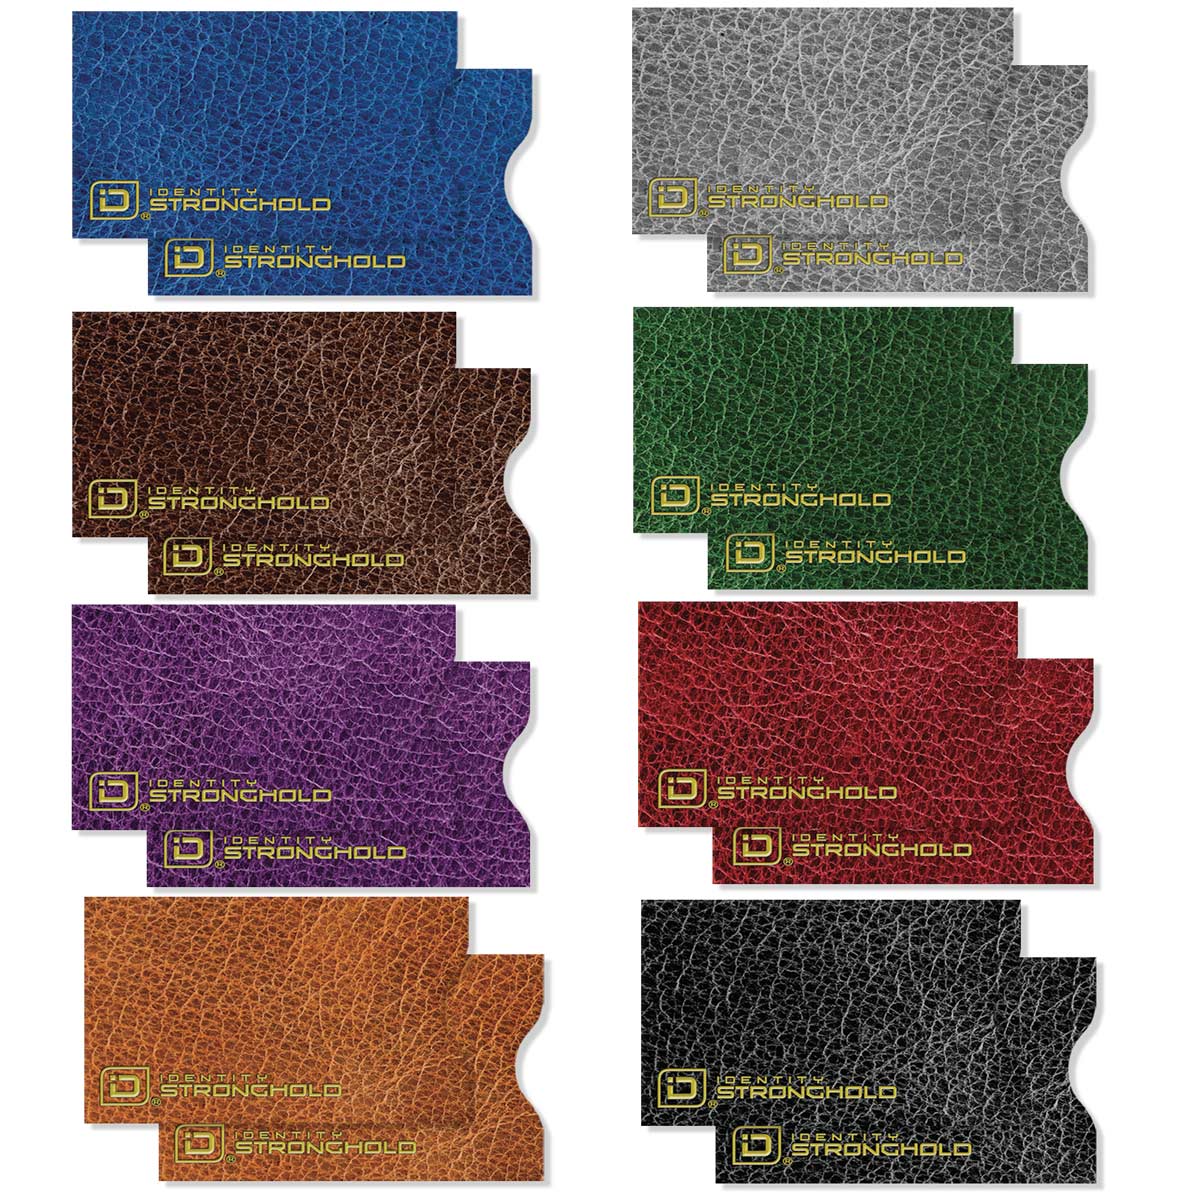 Credit Card Sleeves - Leather Look 16 Pack